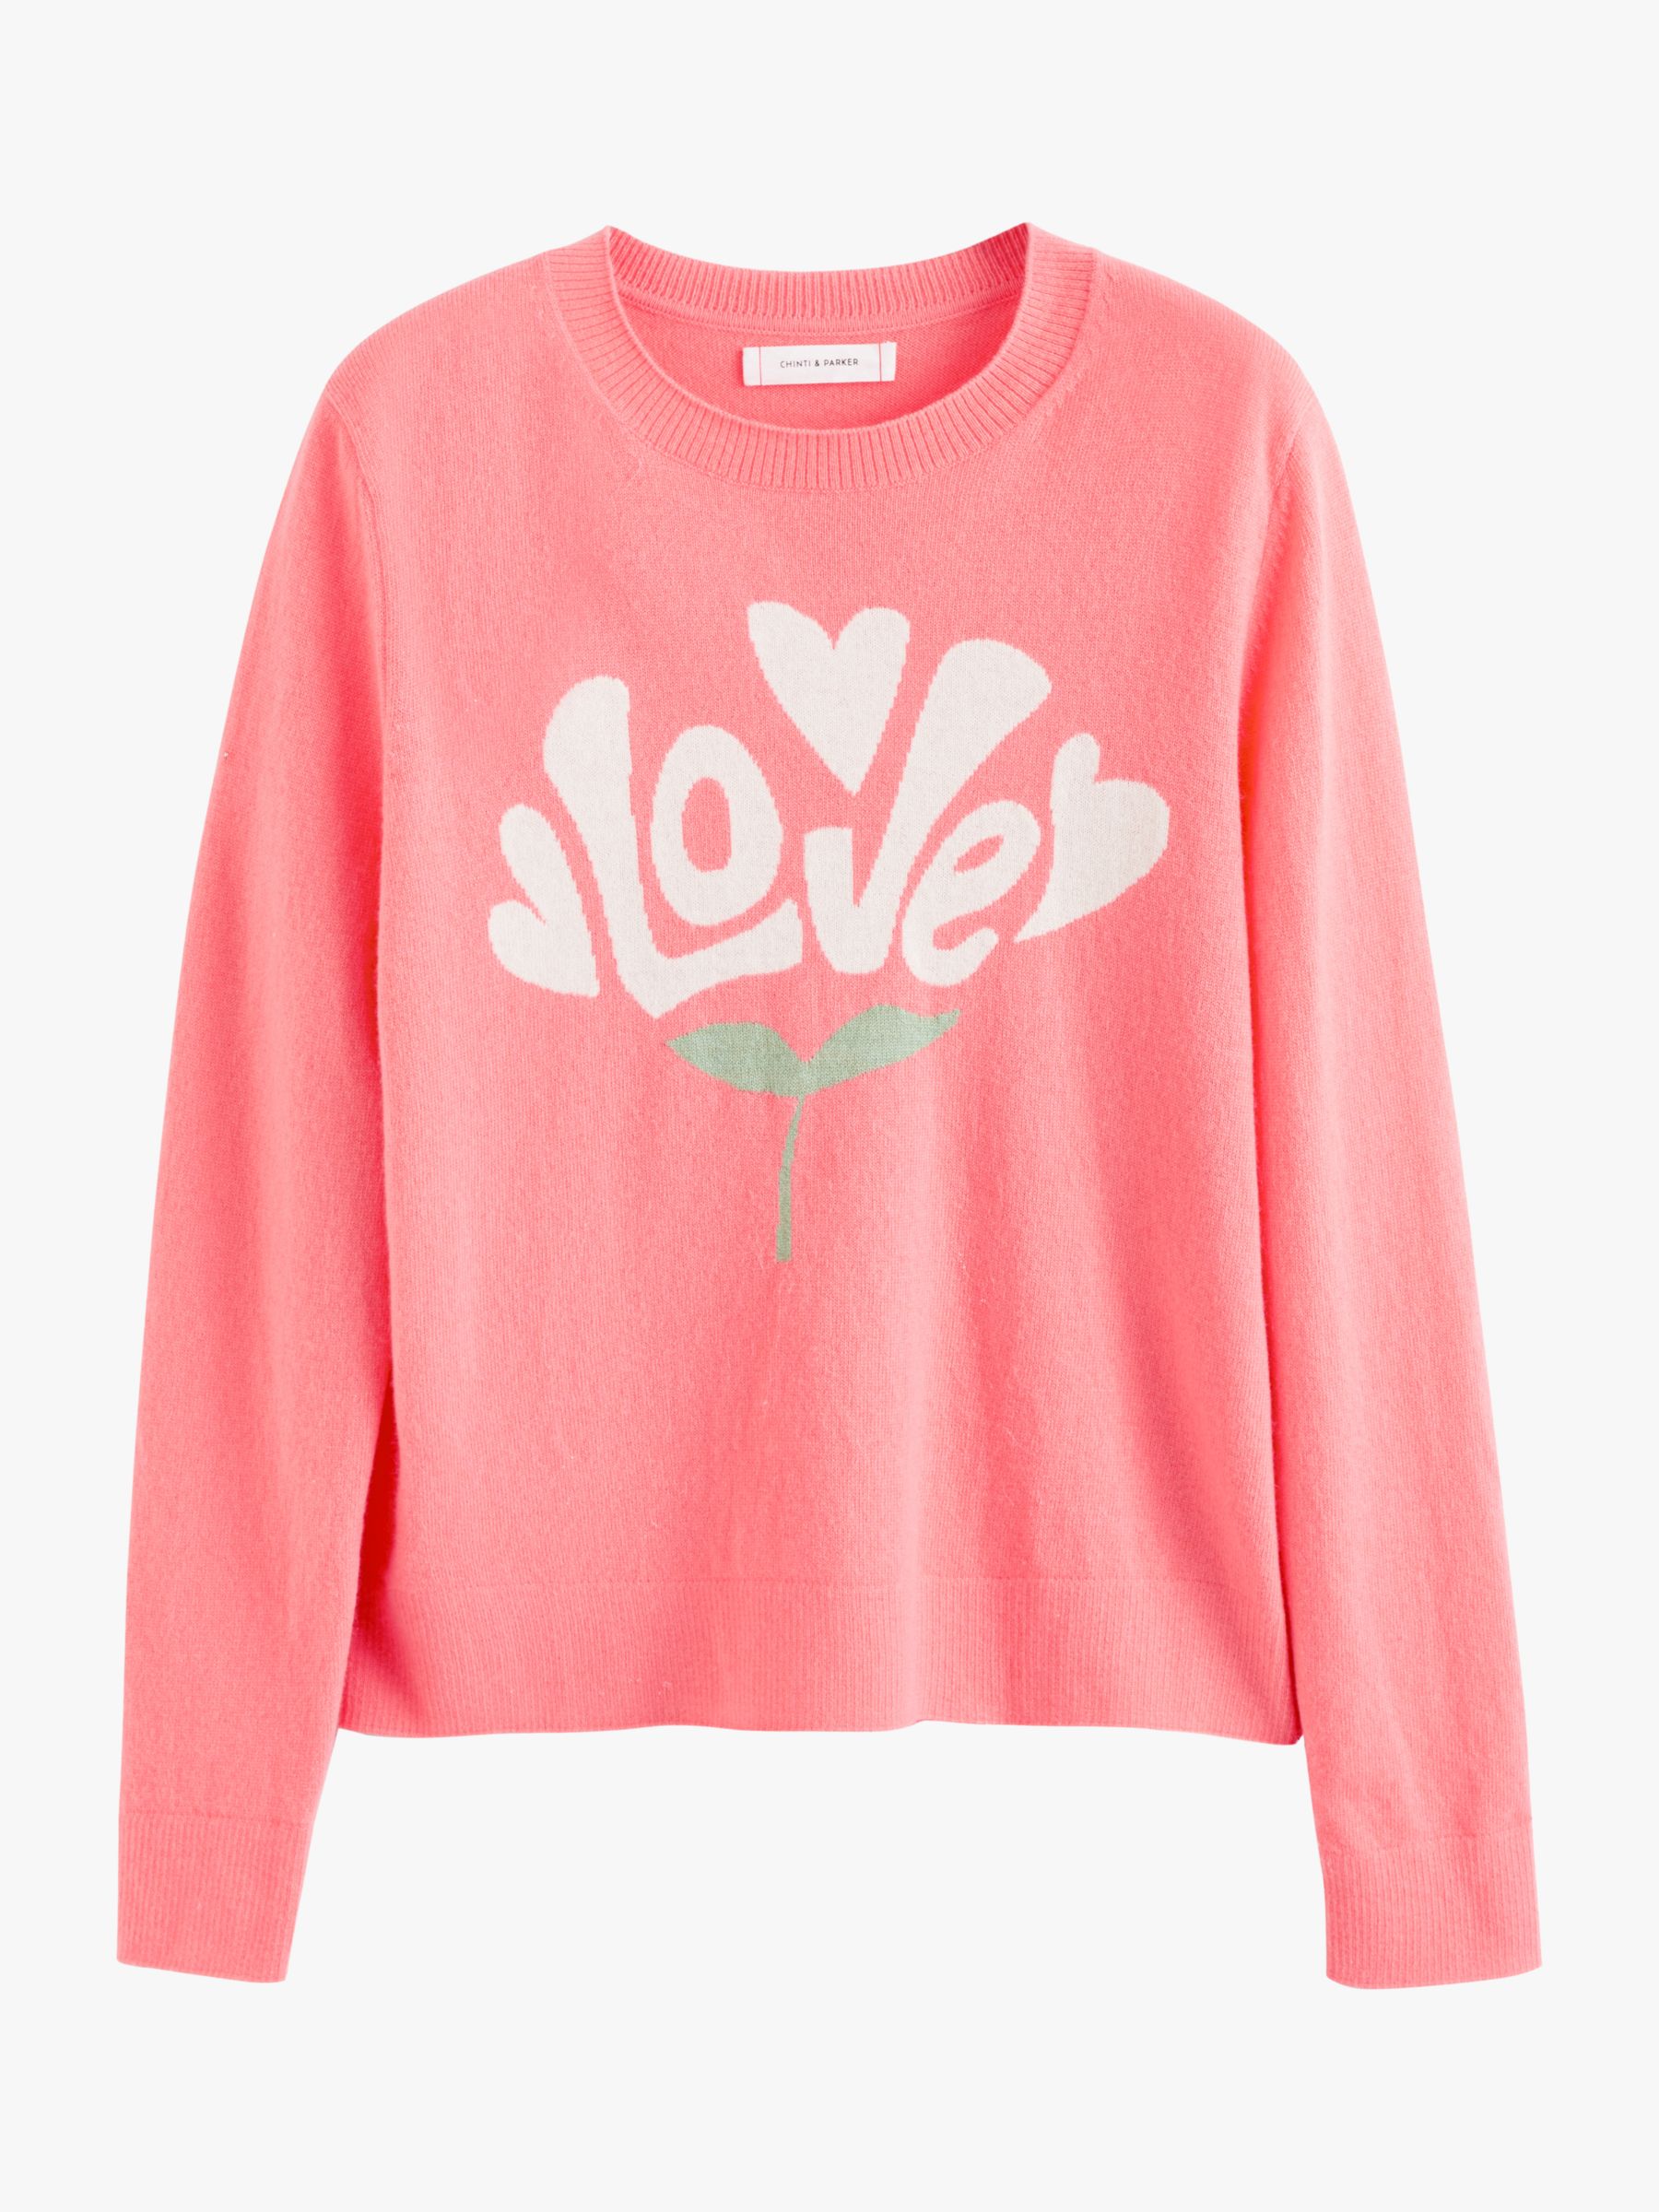 Chinti & Parker Bloom Love Wool Cashmere Jumper, Living Coral, XS